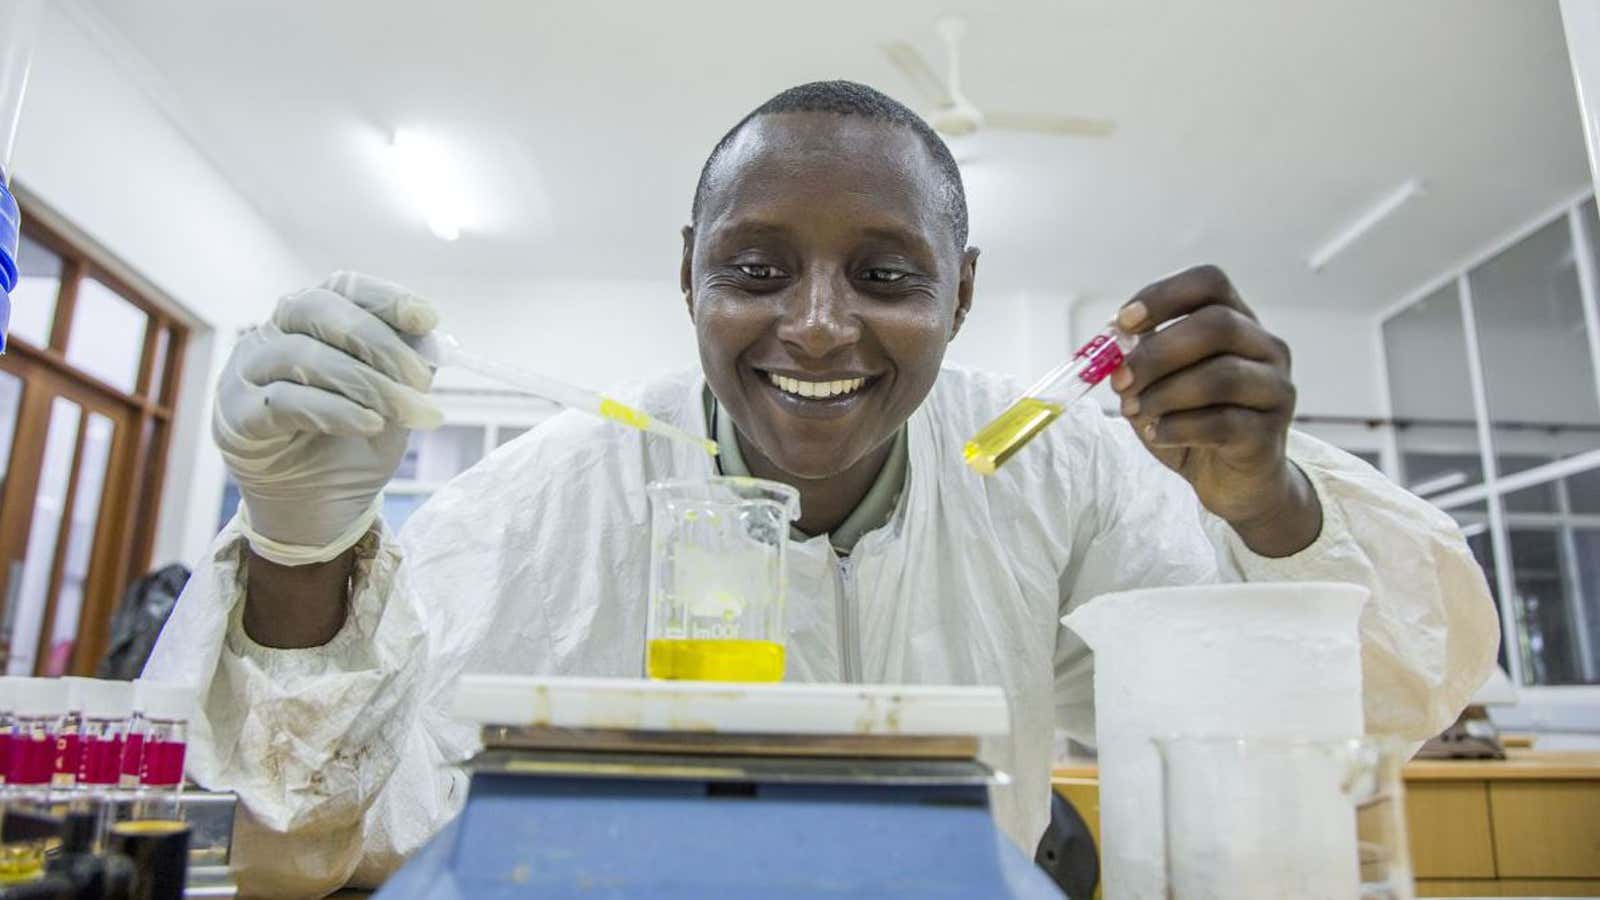 Tanzanian nanotechnologist Askwar Hilonga is the winner of the 2015 Africa Prize for Engineering Innovation